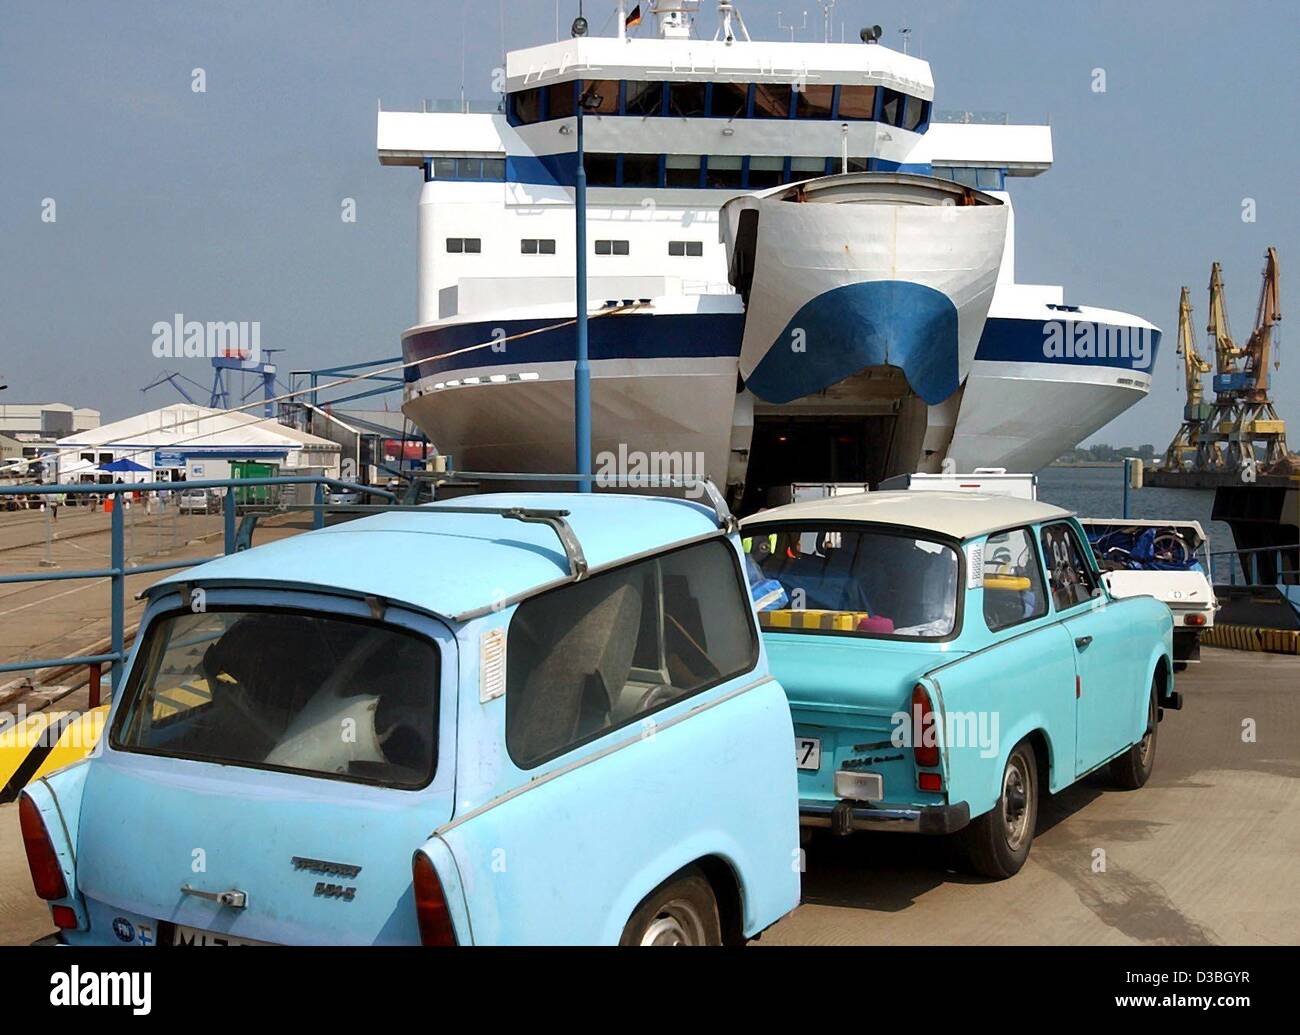 (dpa) - A turquoise Trabant (Trabi) car with a blue 'Trabi-trailer' queues for the gas turbine ship Finnjet of Silja Line in the harbour in Rostock, Germany, 4 June 2003. With 30 knots (about 56 kmph) the ship is the fastest ferry on the Baltic Sea. It is already in its fifth season to make the trip Stock Photo